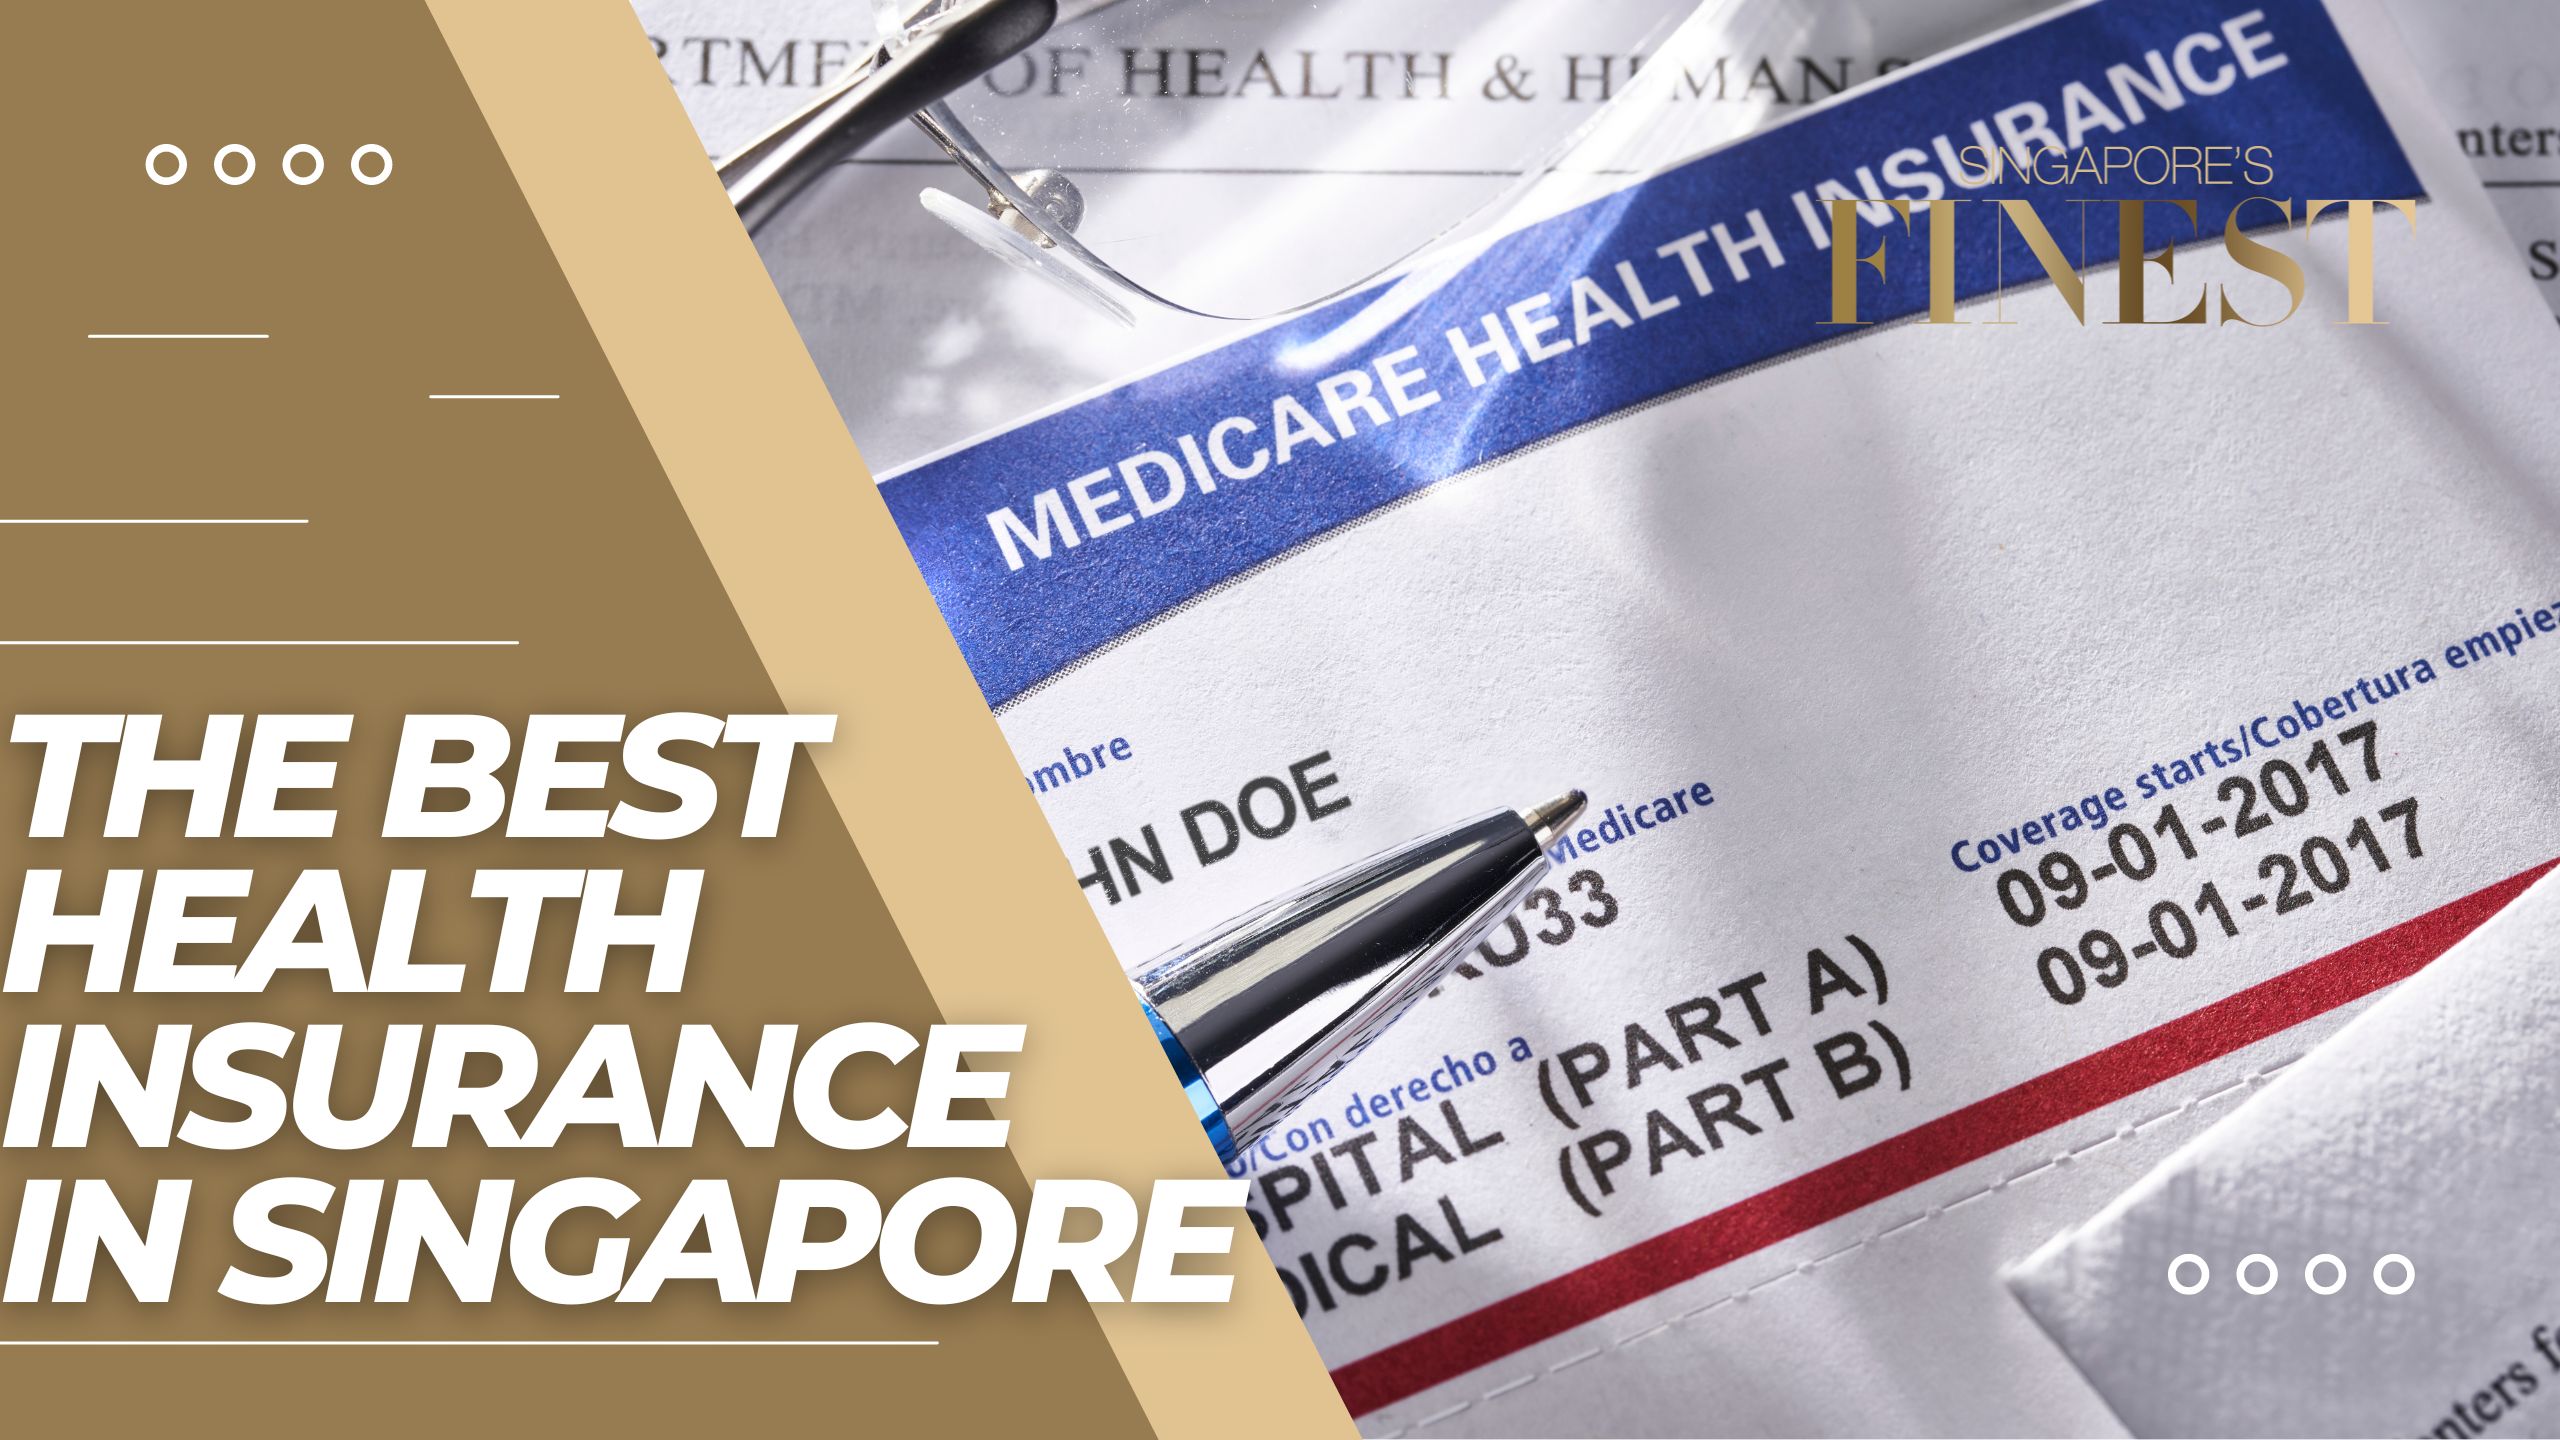 The Finest Health Insurance in Singapore